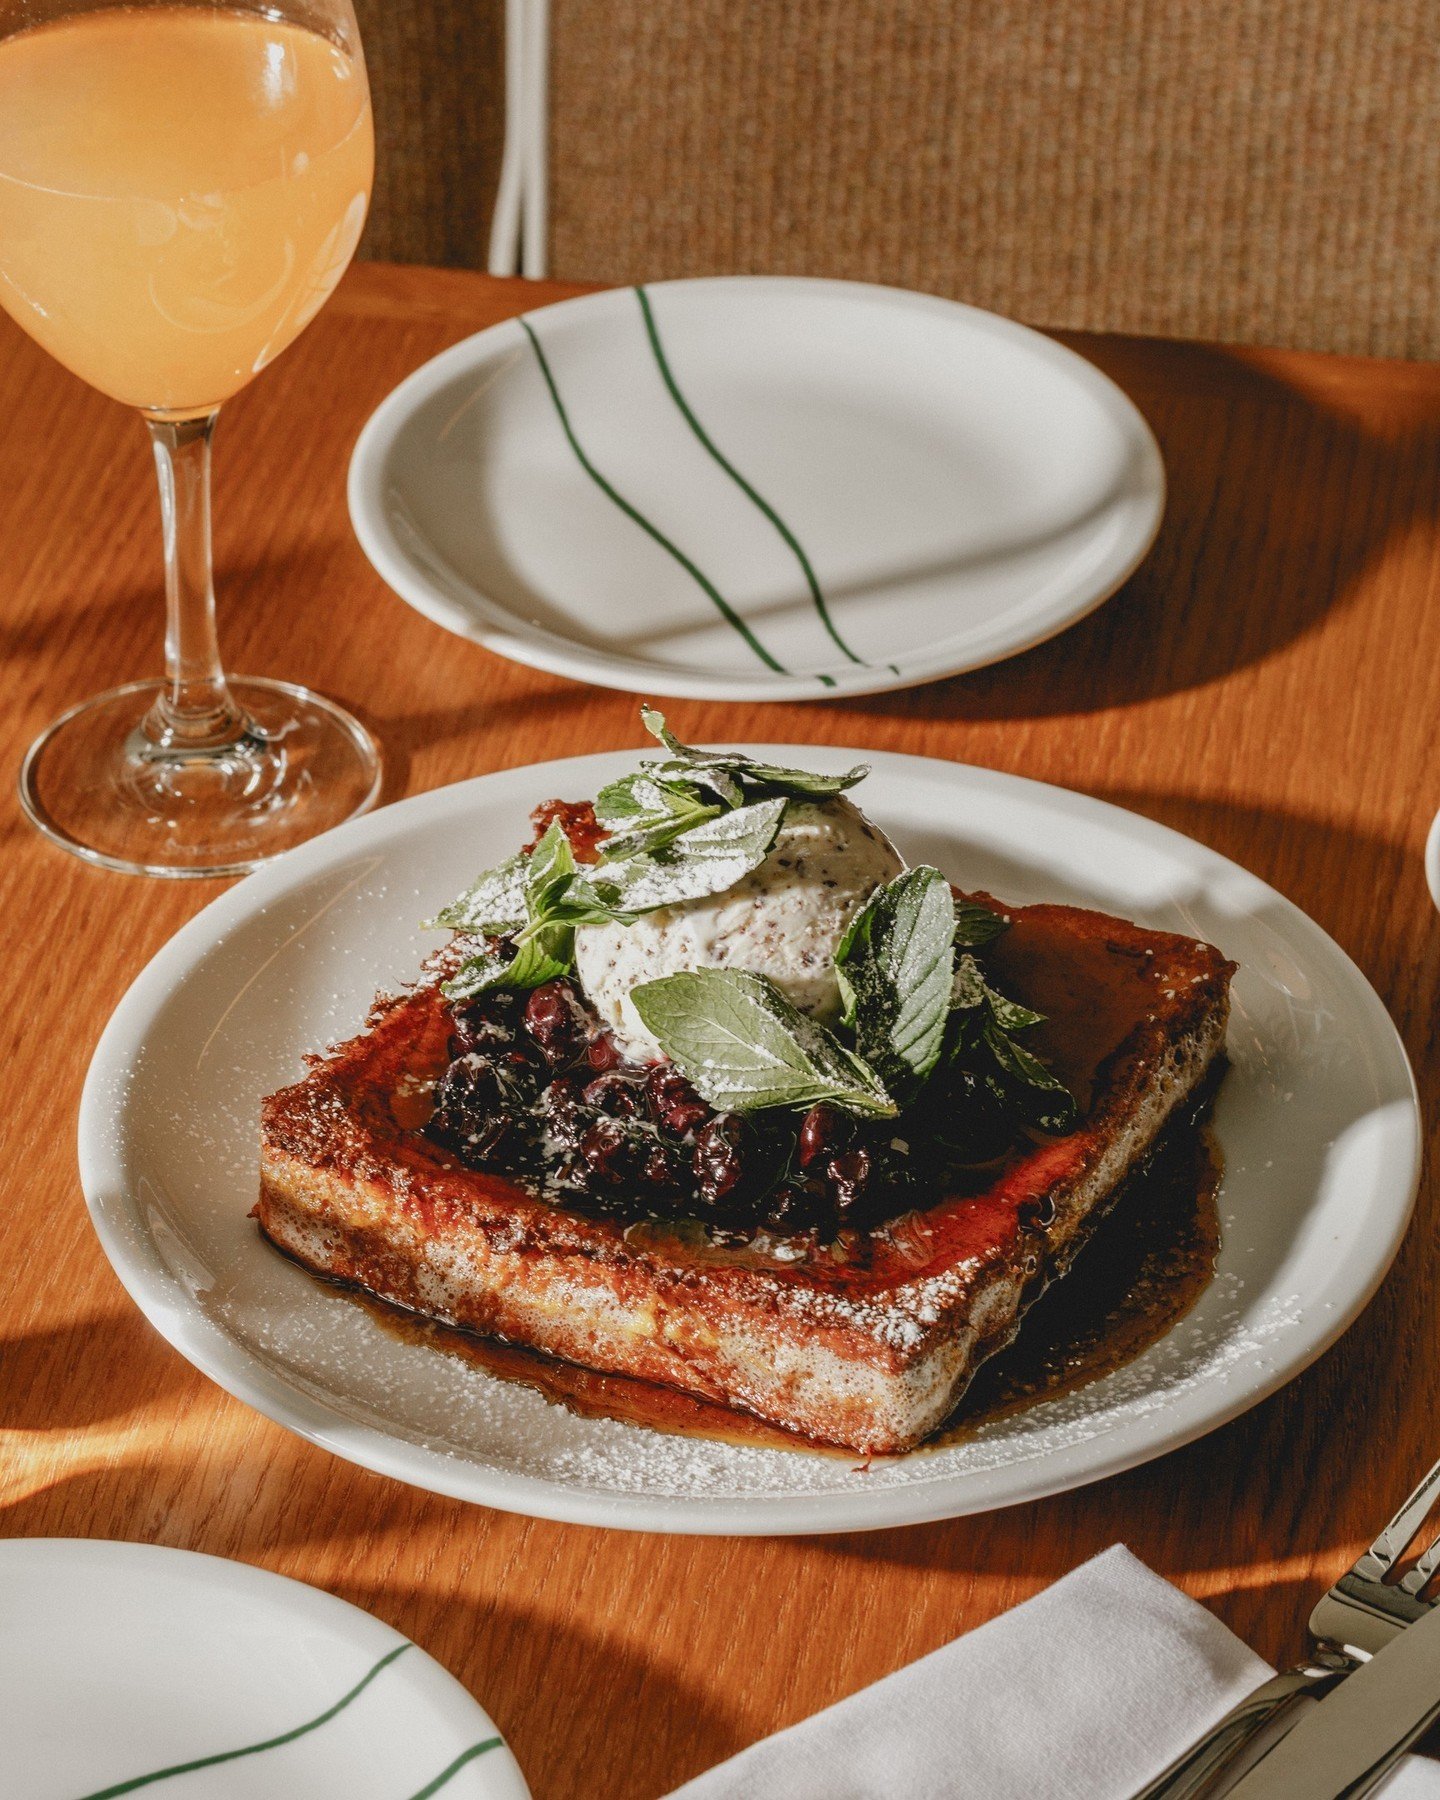 For Mother&rsquo;s Day, @lifeunphiltered shared his recipe for Italian-style French toast with @thevancouversun ~ fruit conserva, fresh mint, maple syrup, and a scoop of stracciatella gelato&hellip;just as it&rsquo;s done for brunch at Elio. 
🌞 
For